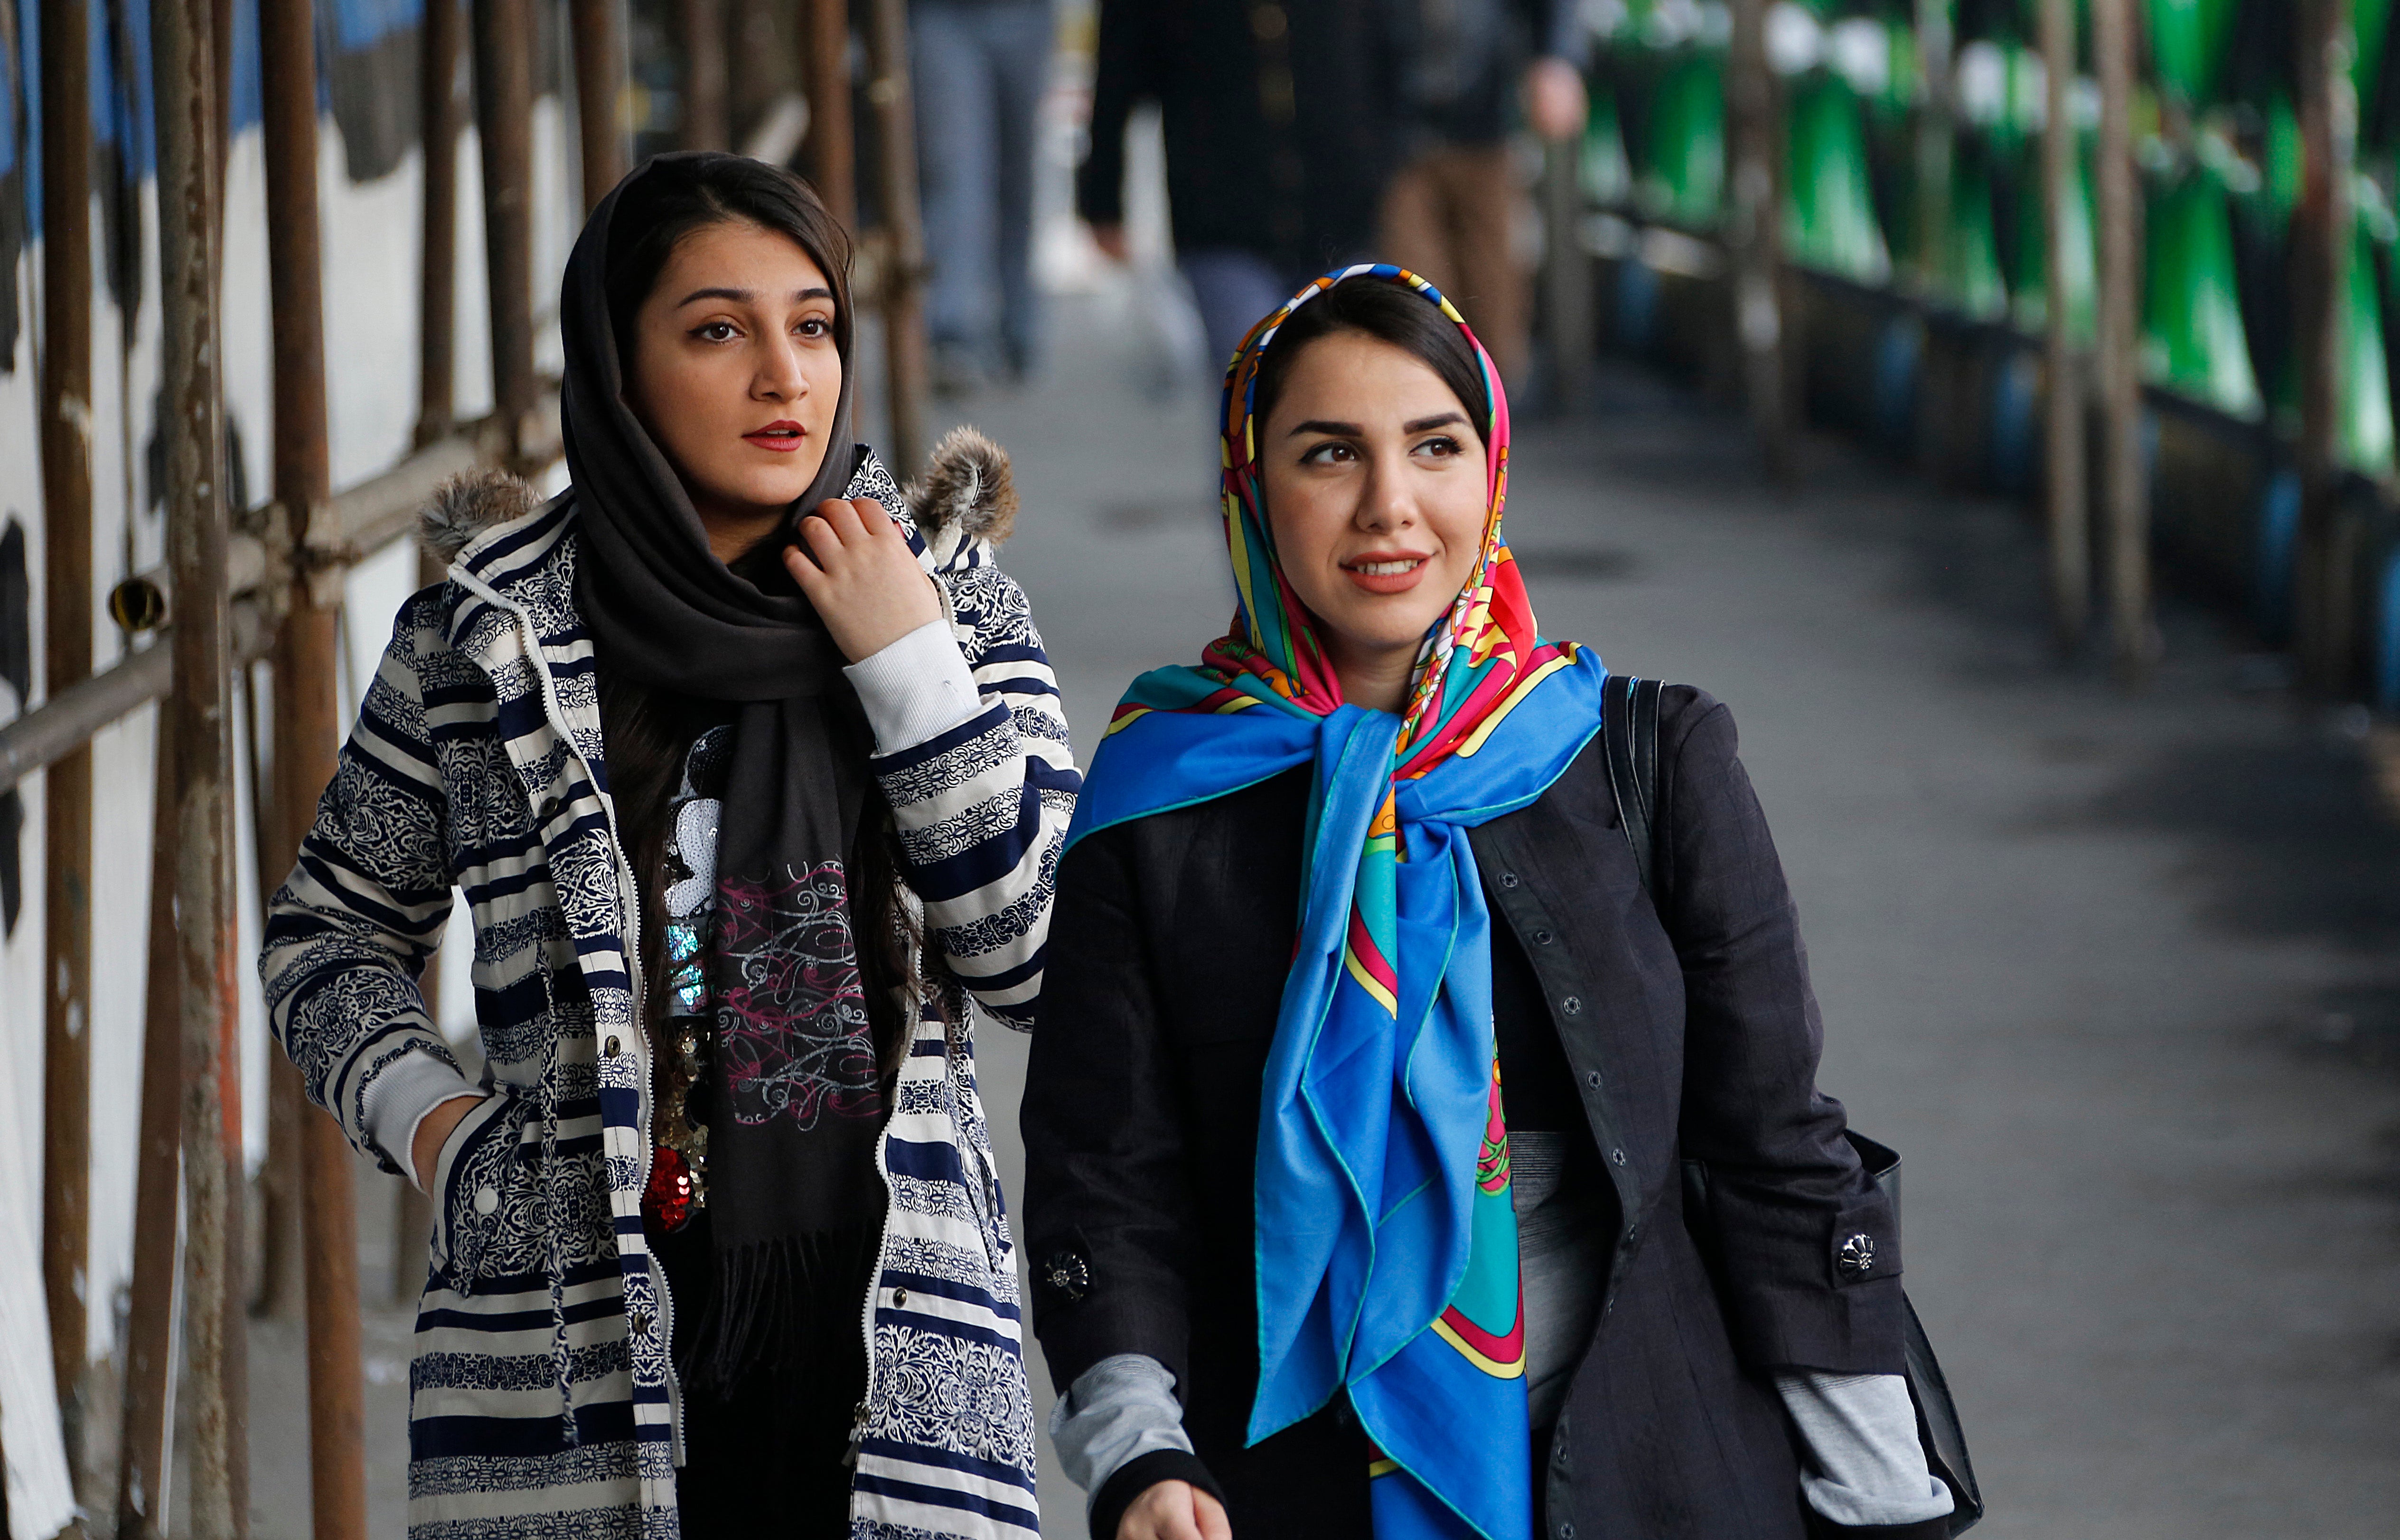 Iranian women removing headscarves to protest mandatory hijab laws The Independent pic